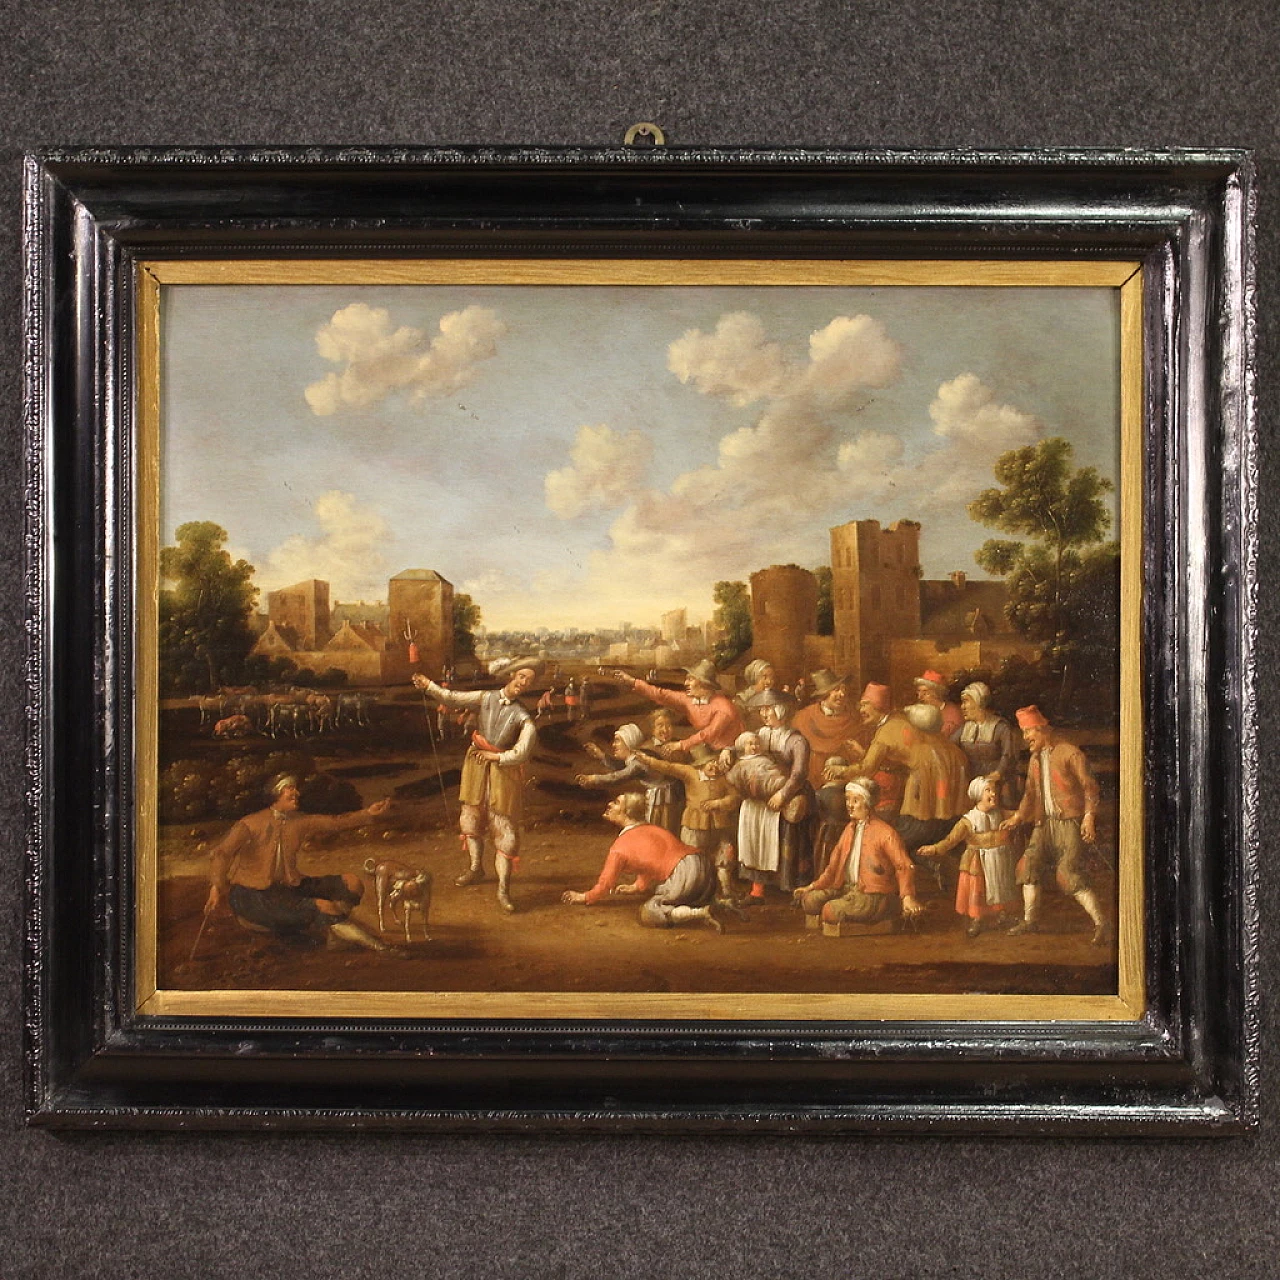 Attributed to Droochsloot, wedding banquet, oil on panel, 17th century 2